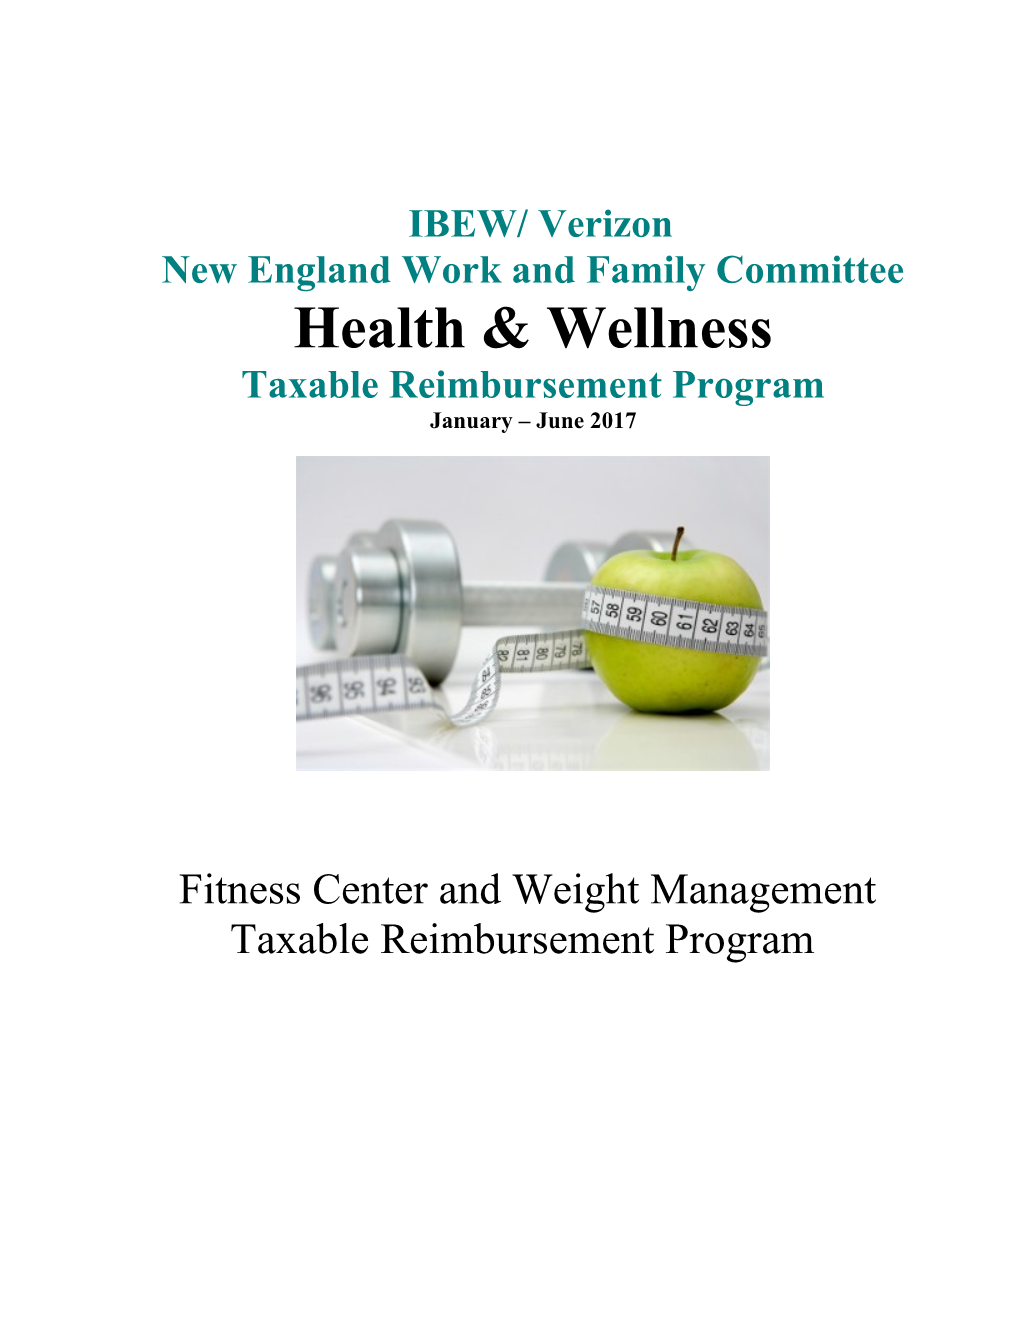 New England Work and Family Committee